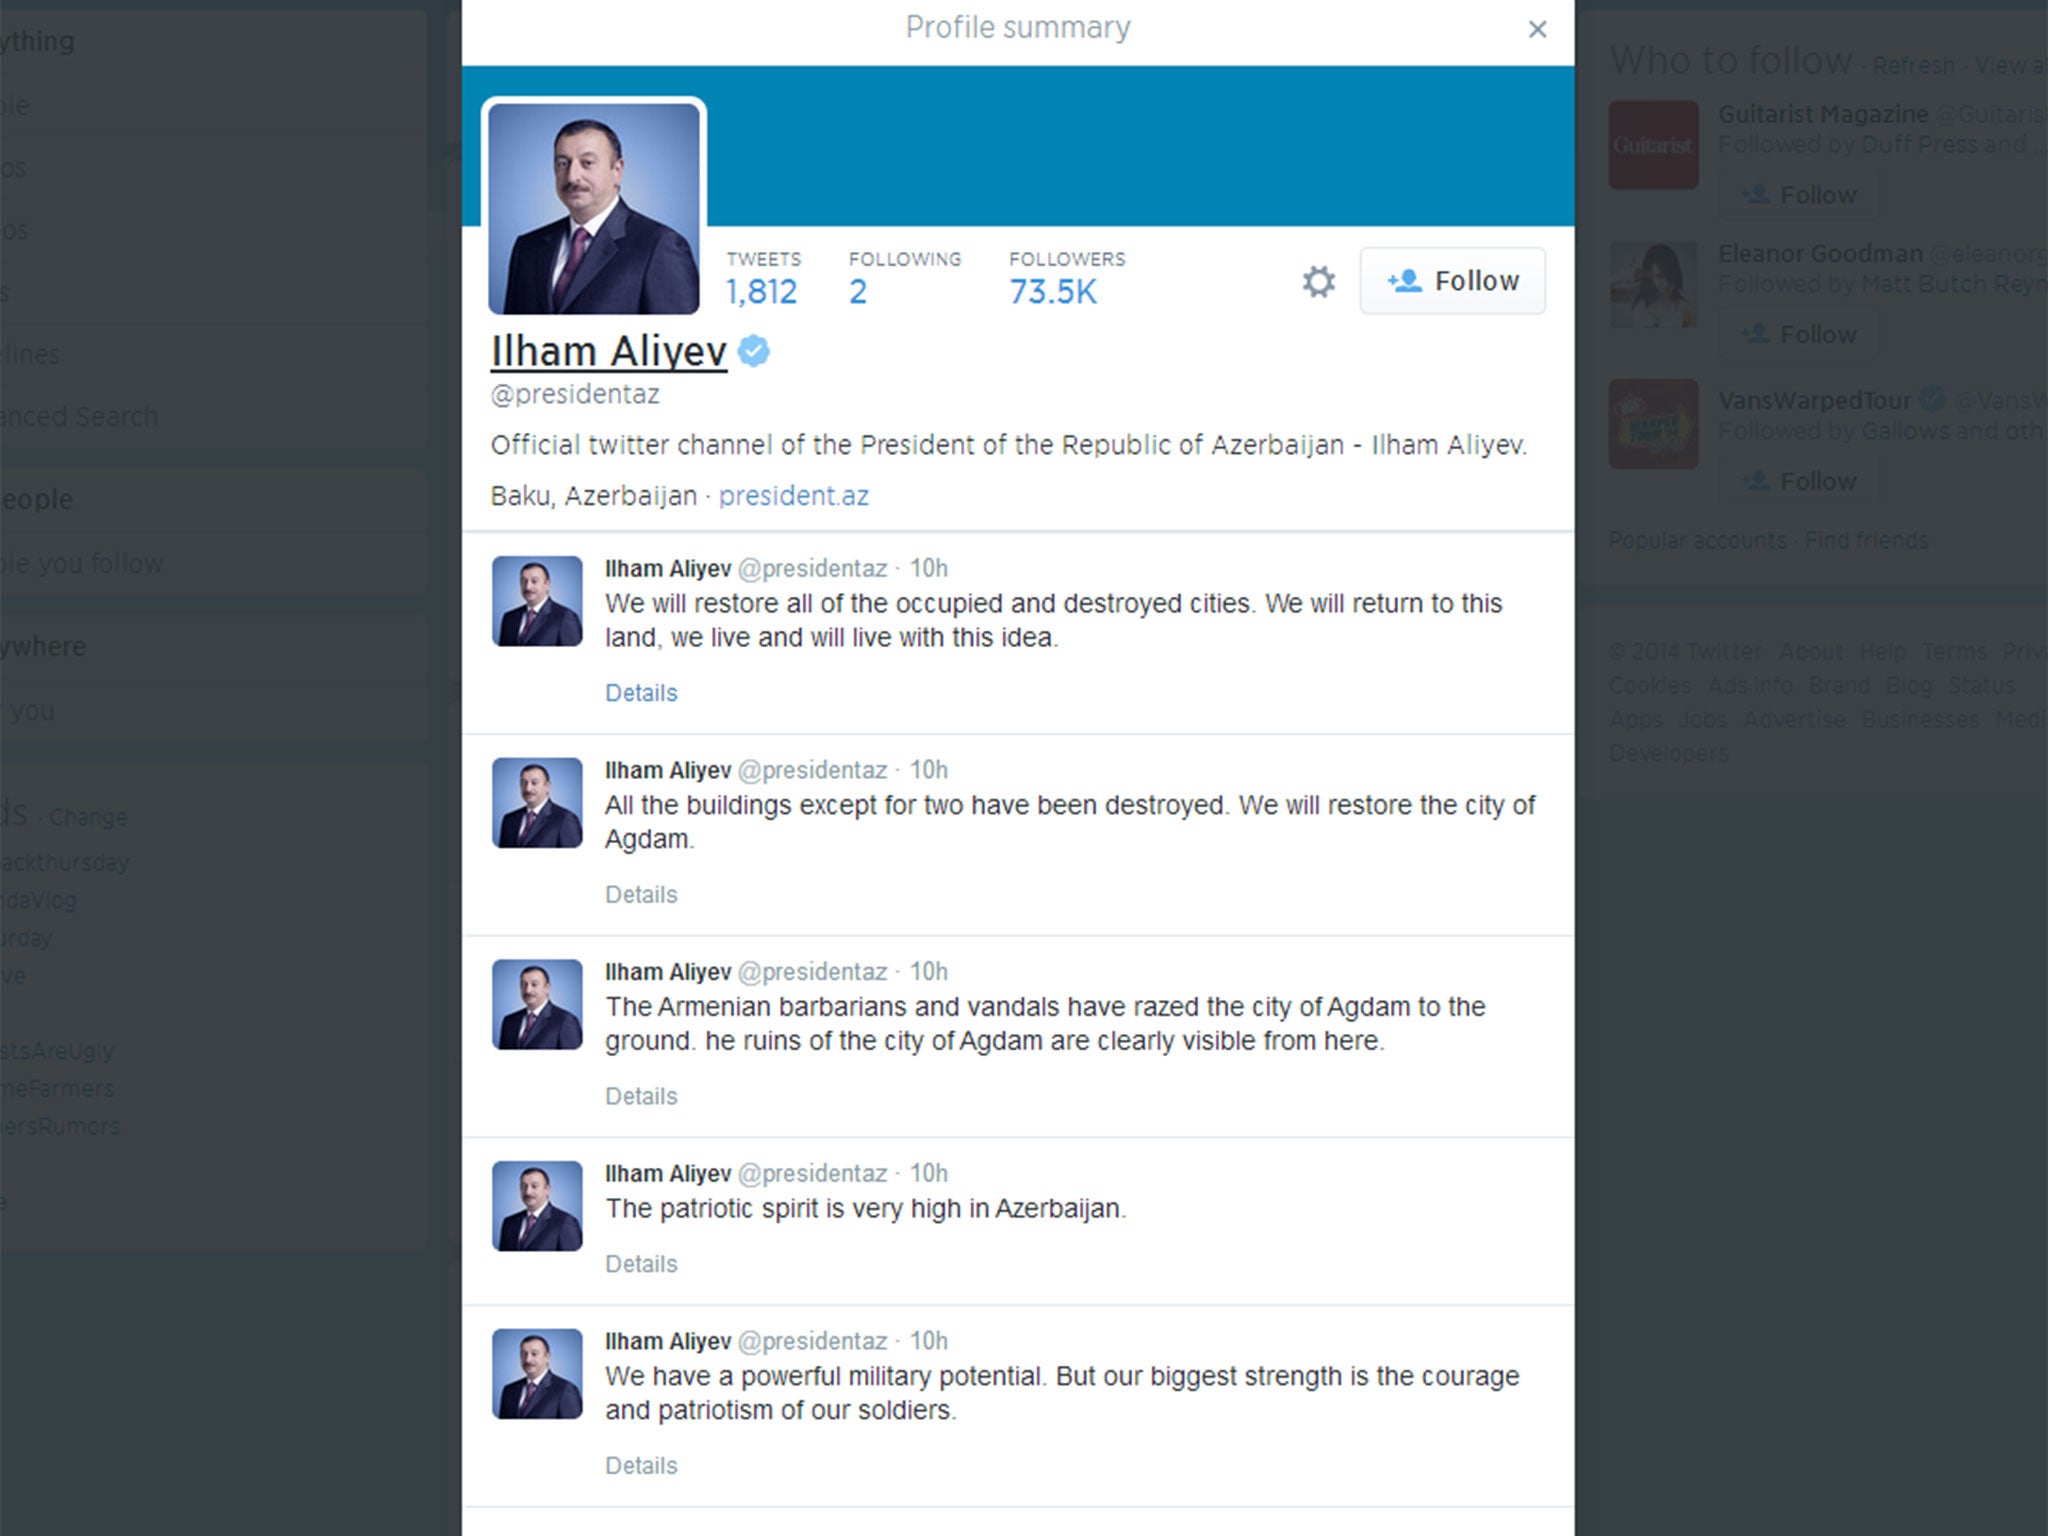 Some of the tweets on President Ilham Aliyev's Twitter account